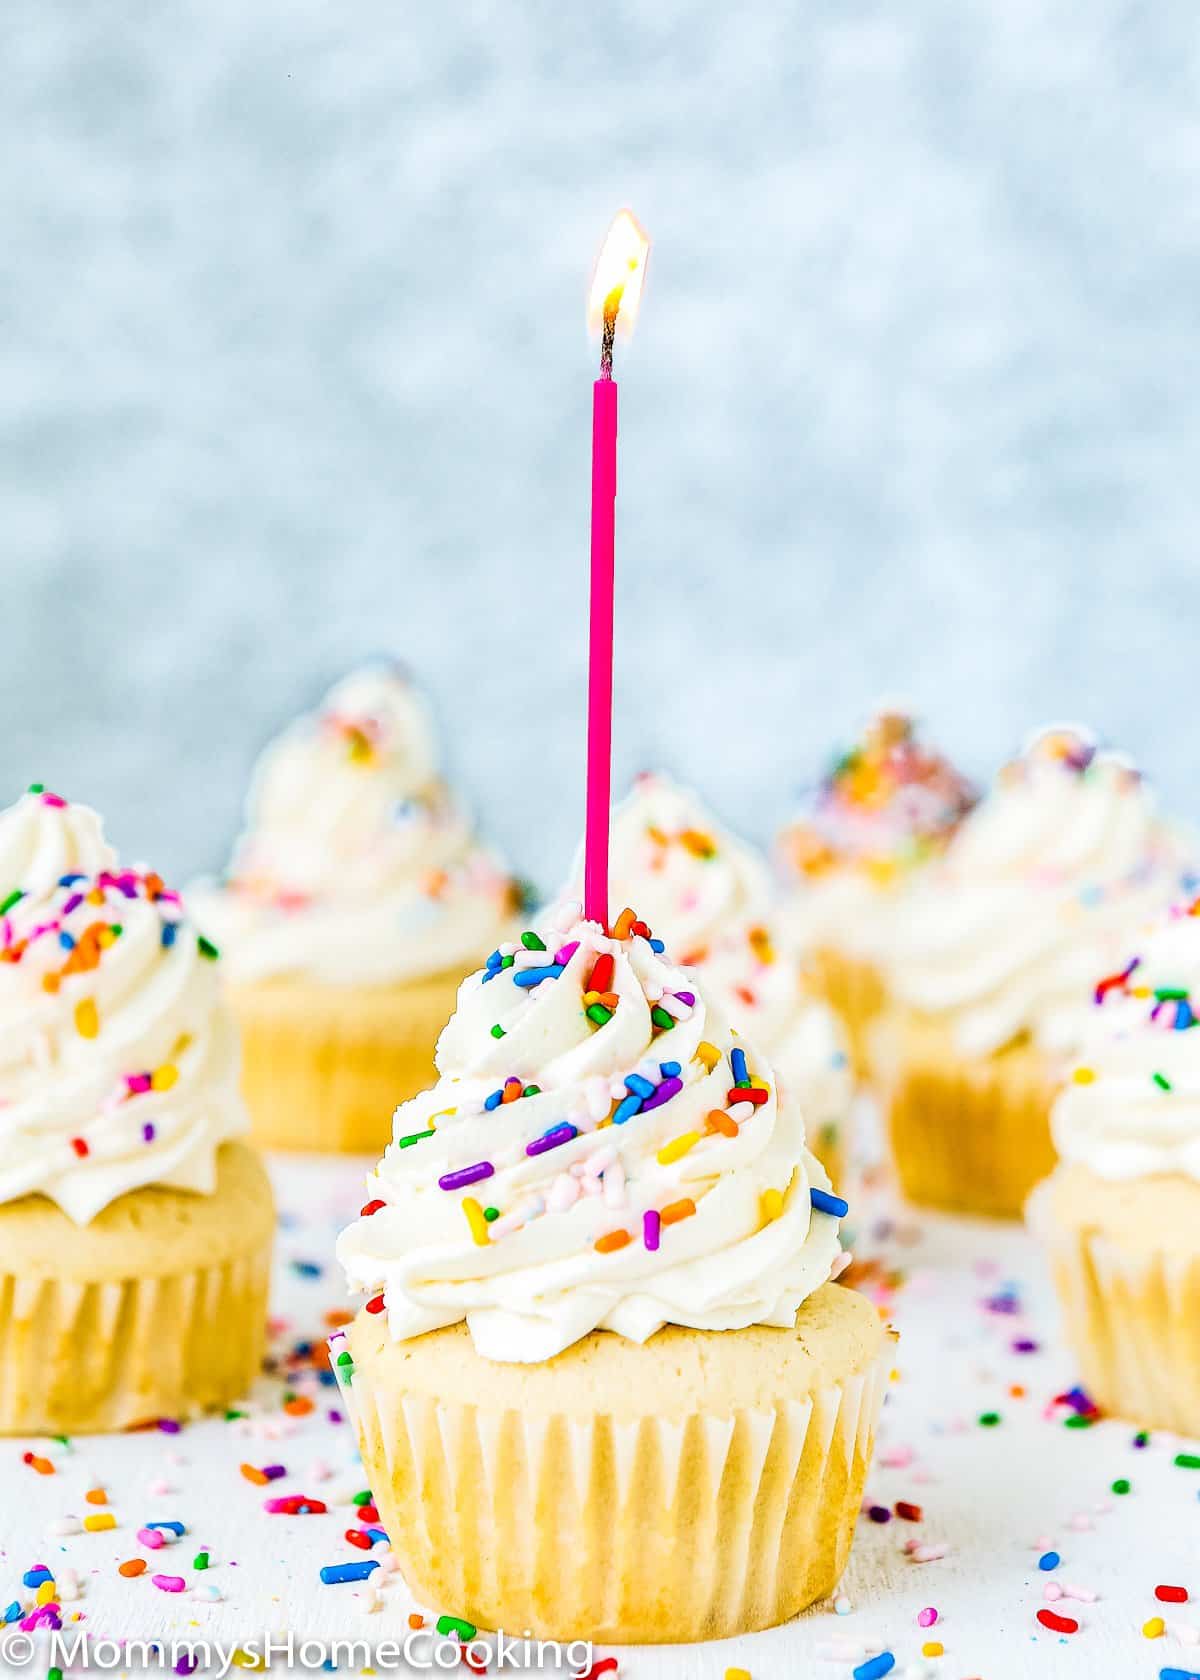 egg free vanilla cupcake with frosting, sprinkles and a candle.